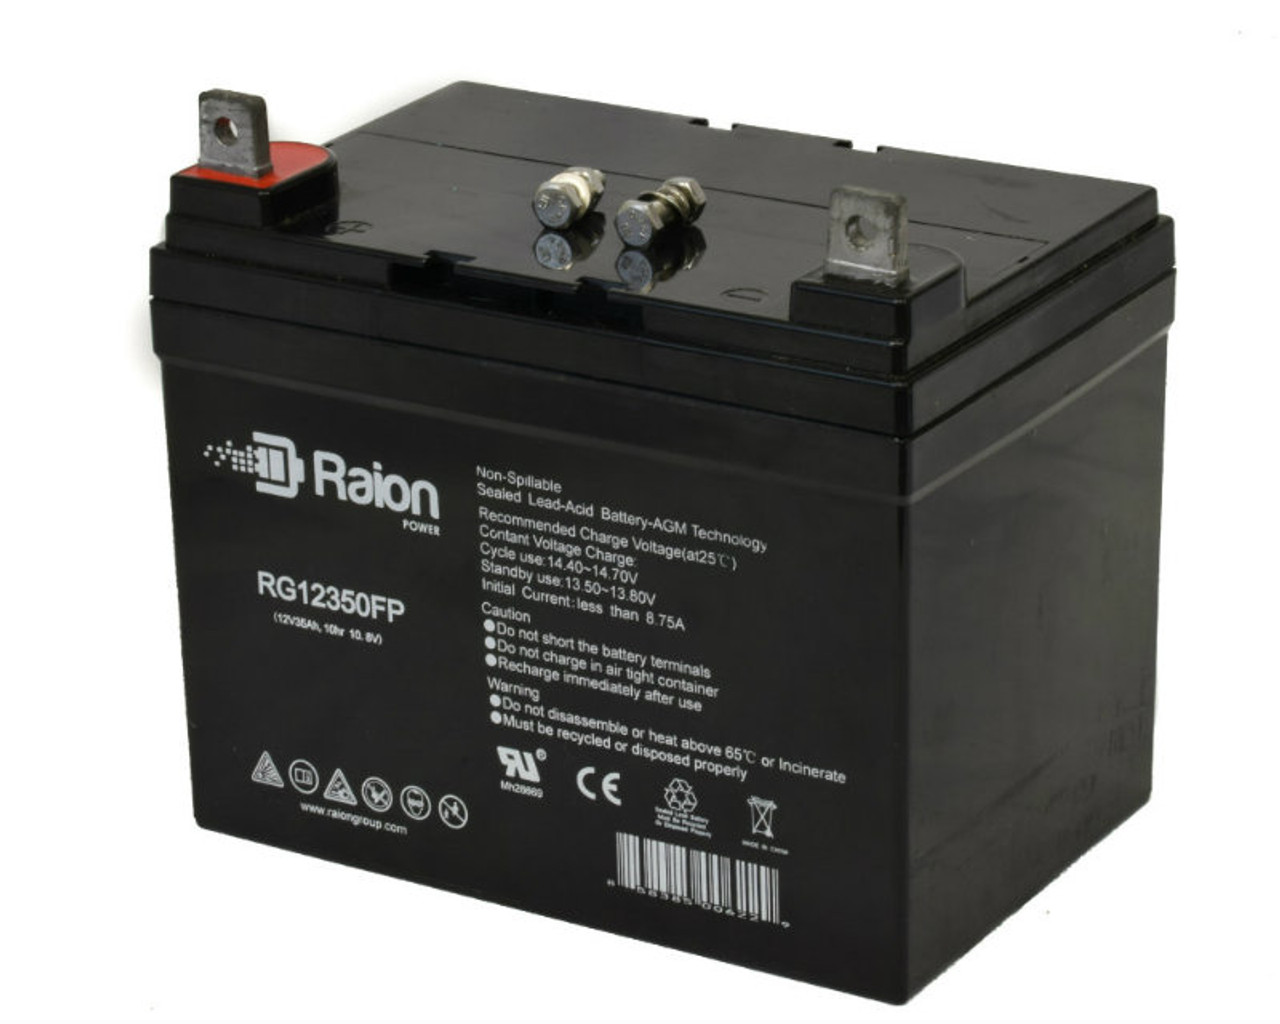 Raion Power Replacement 12V 35Ah RG12350FP Battery for Power Rite PRB1233NB